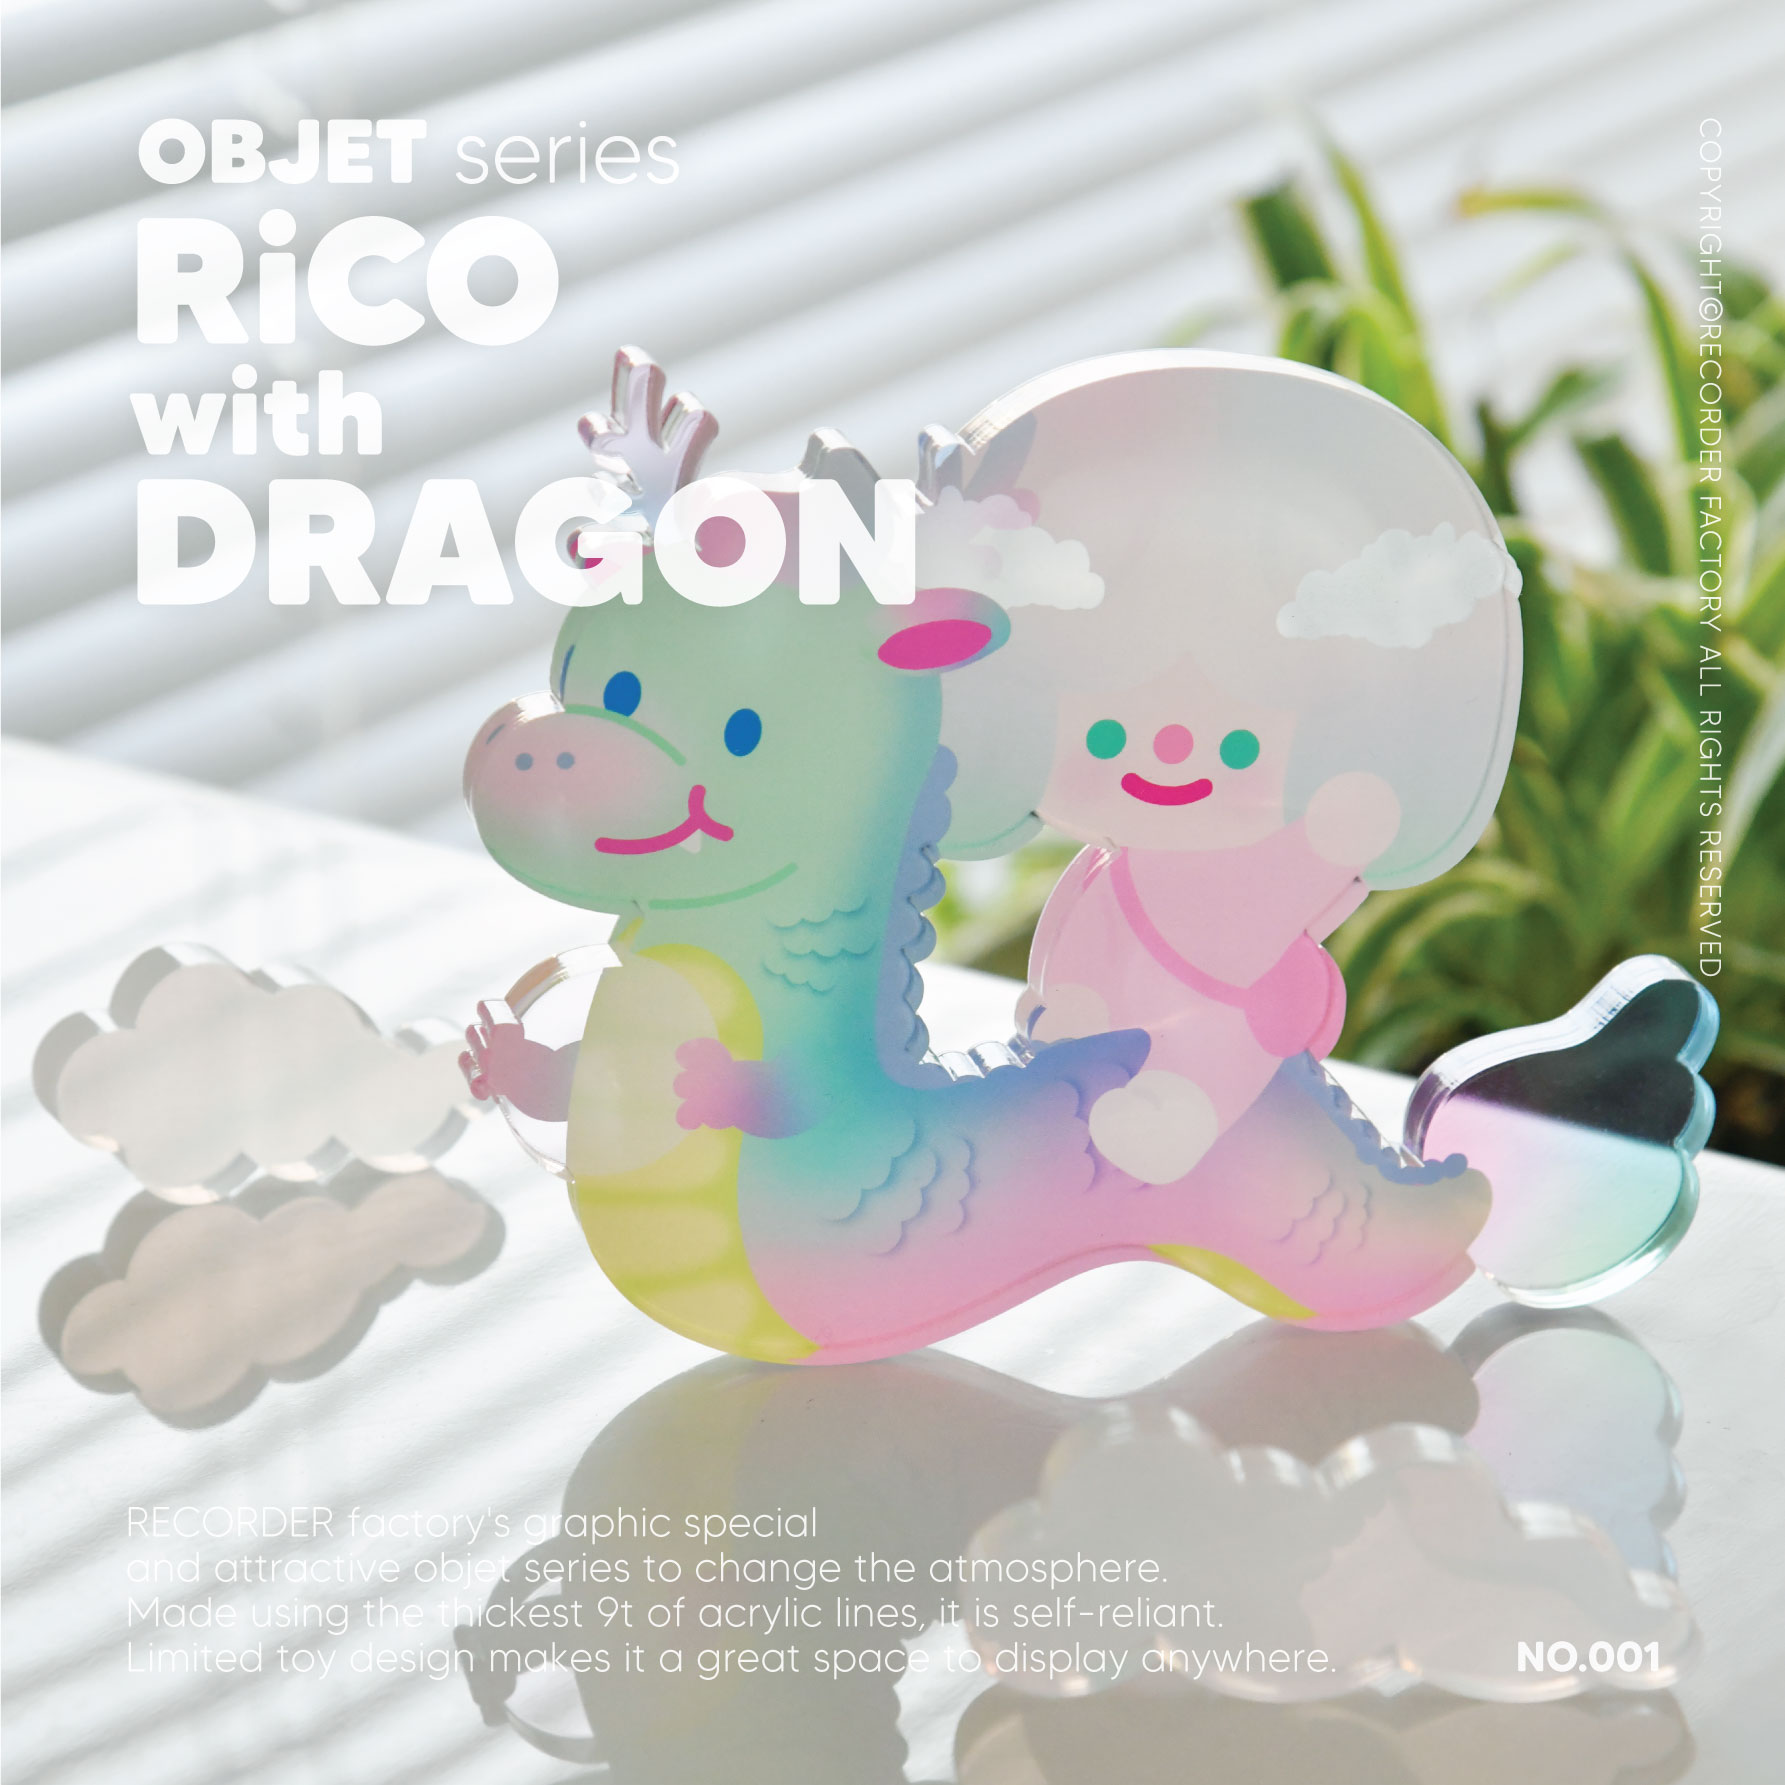 OBJET SERIES NO.001 RiCO with DRAGON